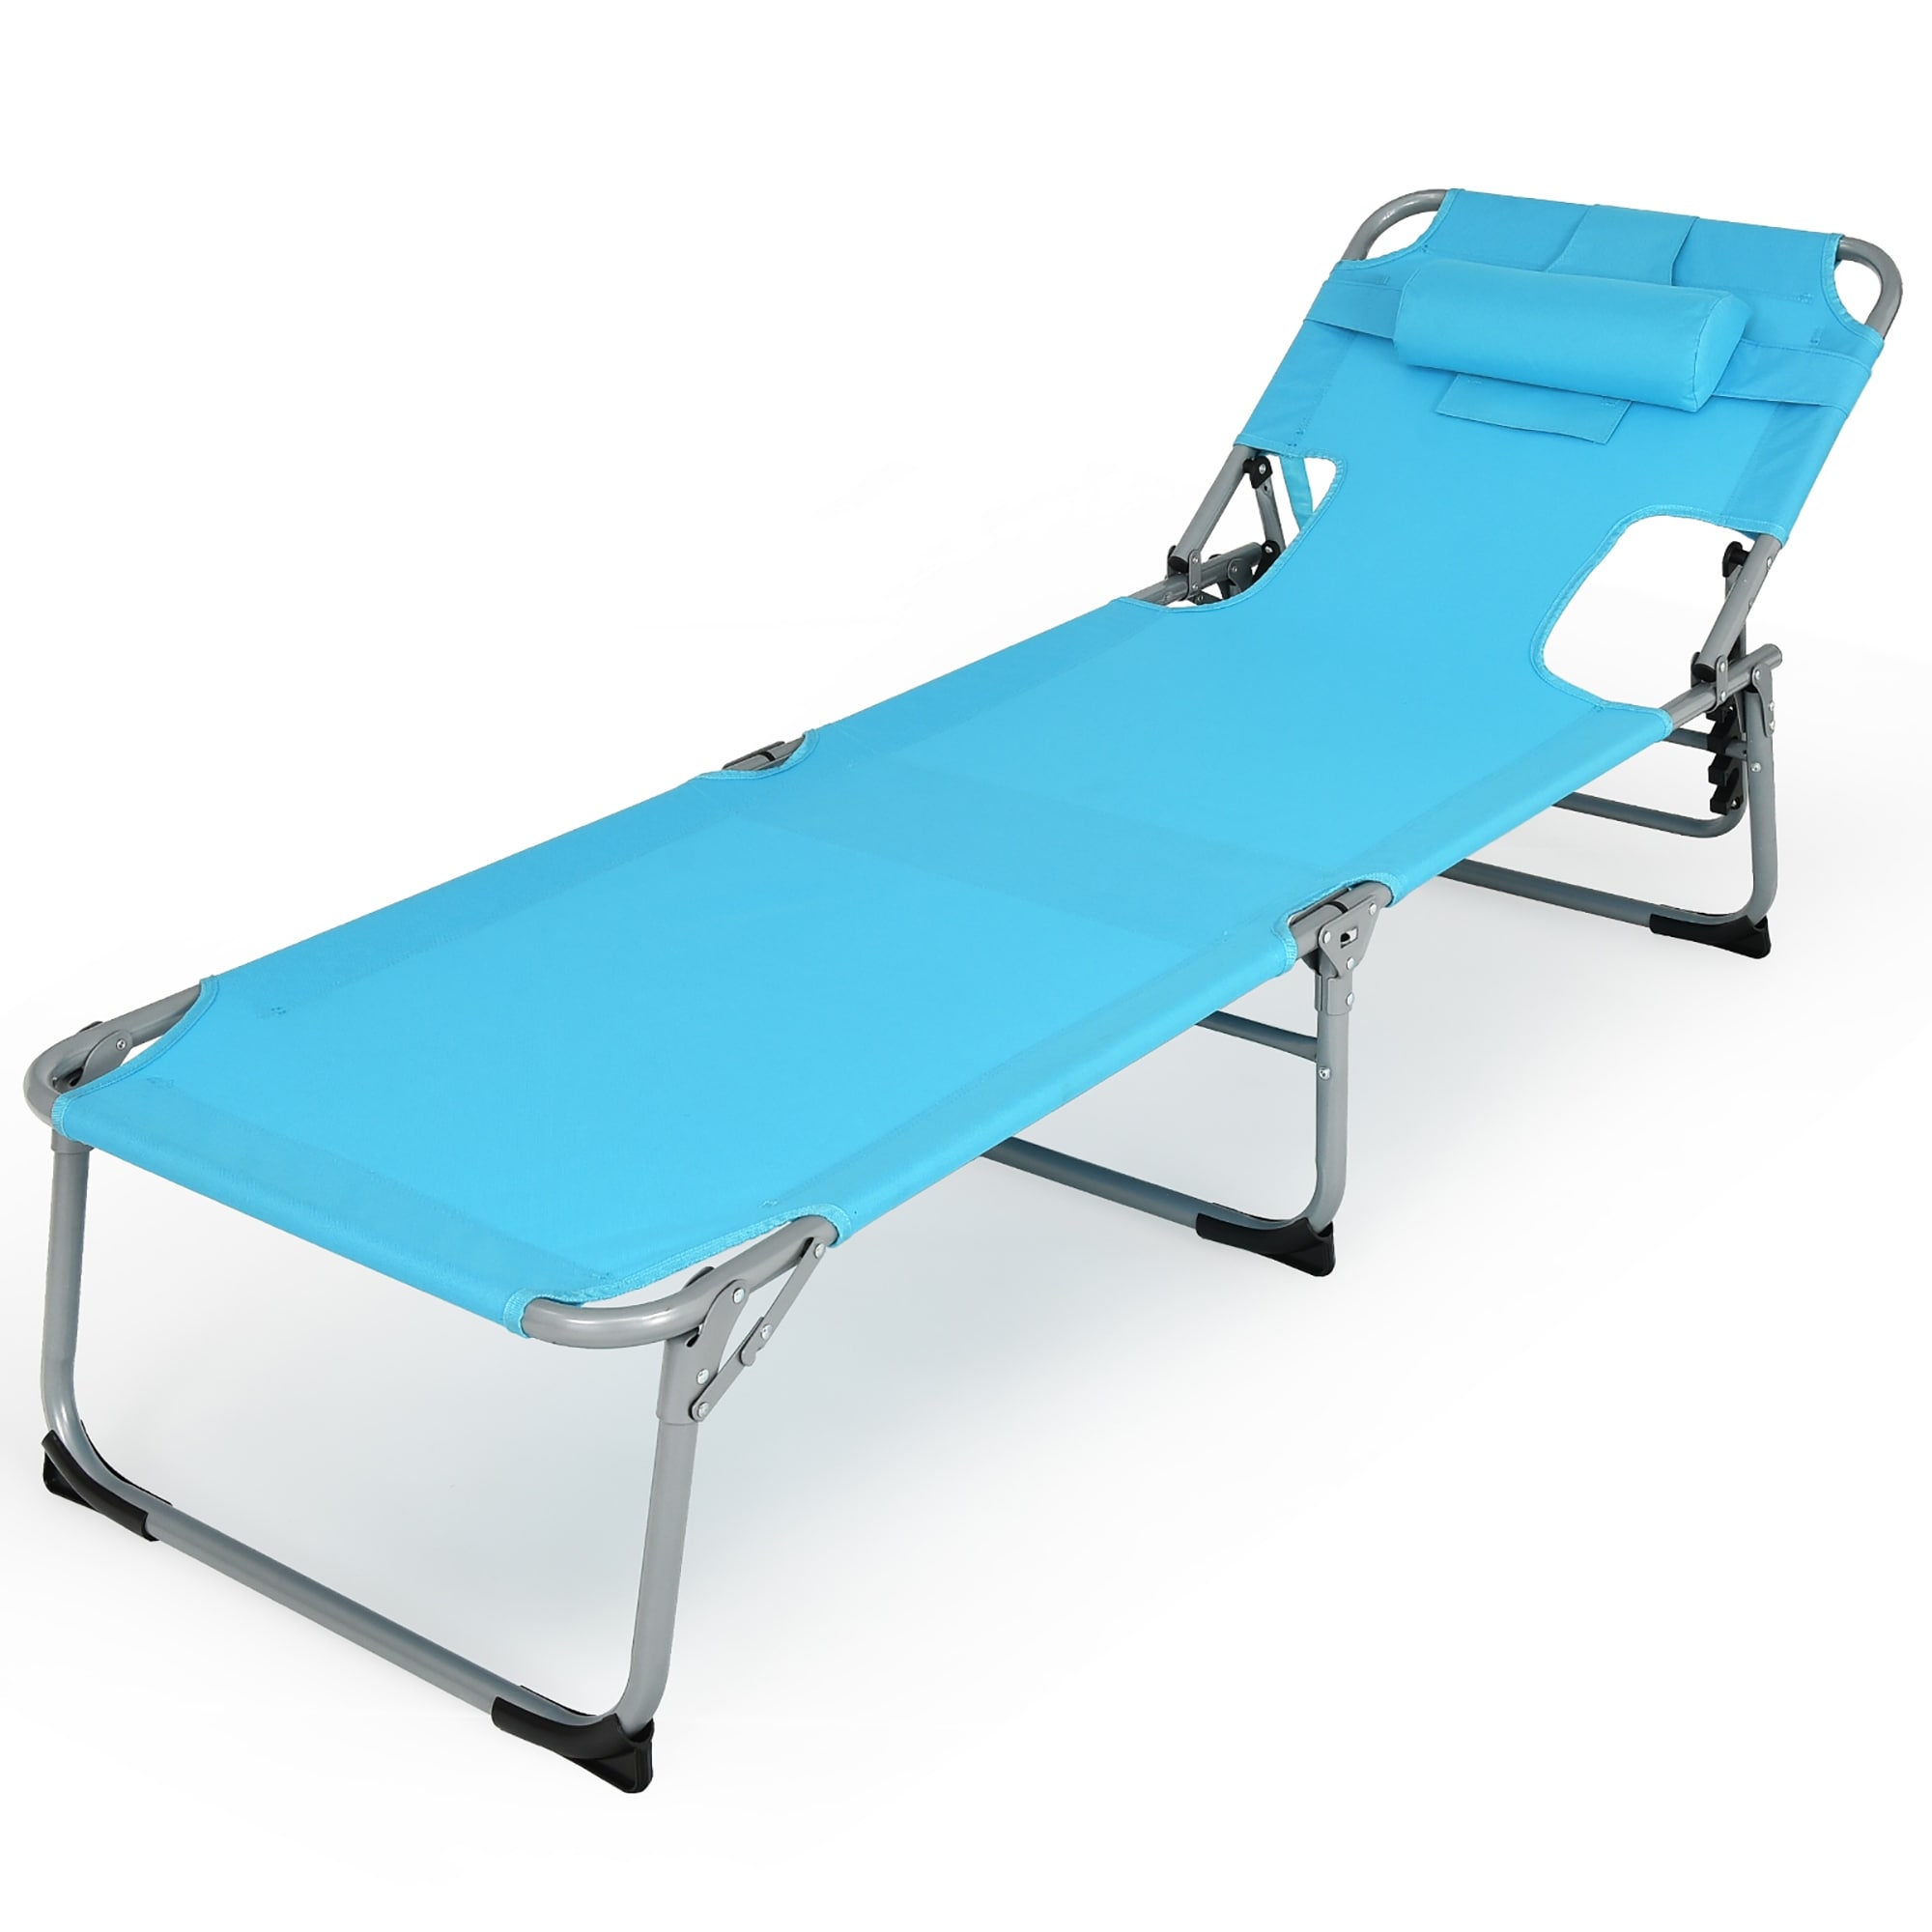 Beach Chaise Lounge Adjustable Sunbathing Chair With Face Cavity